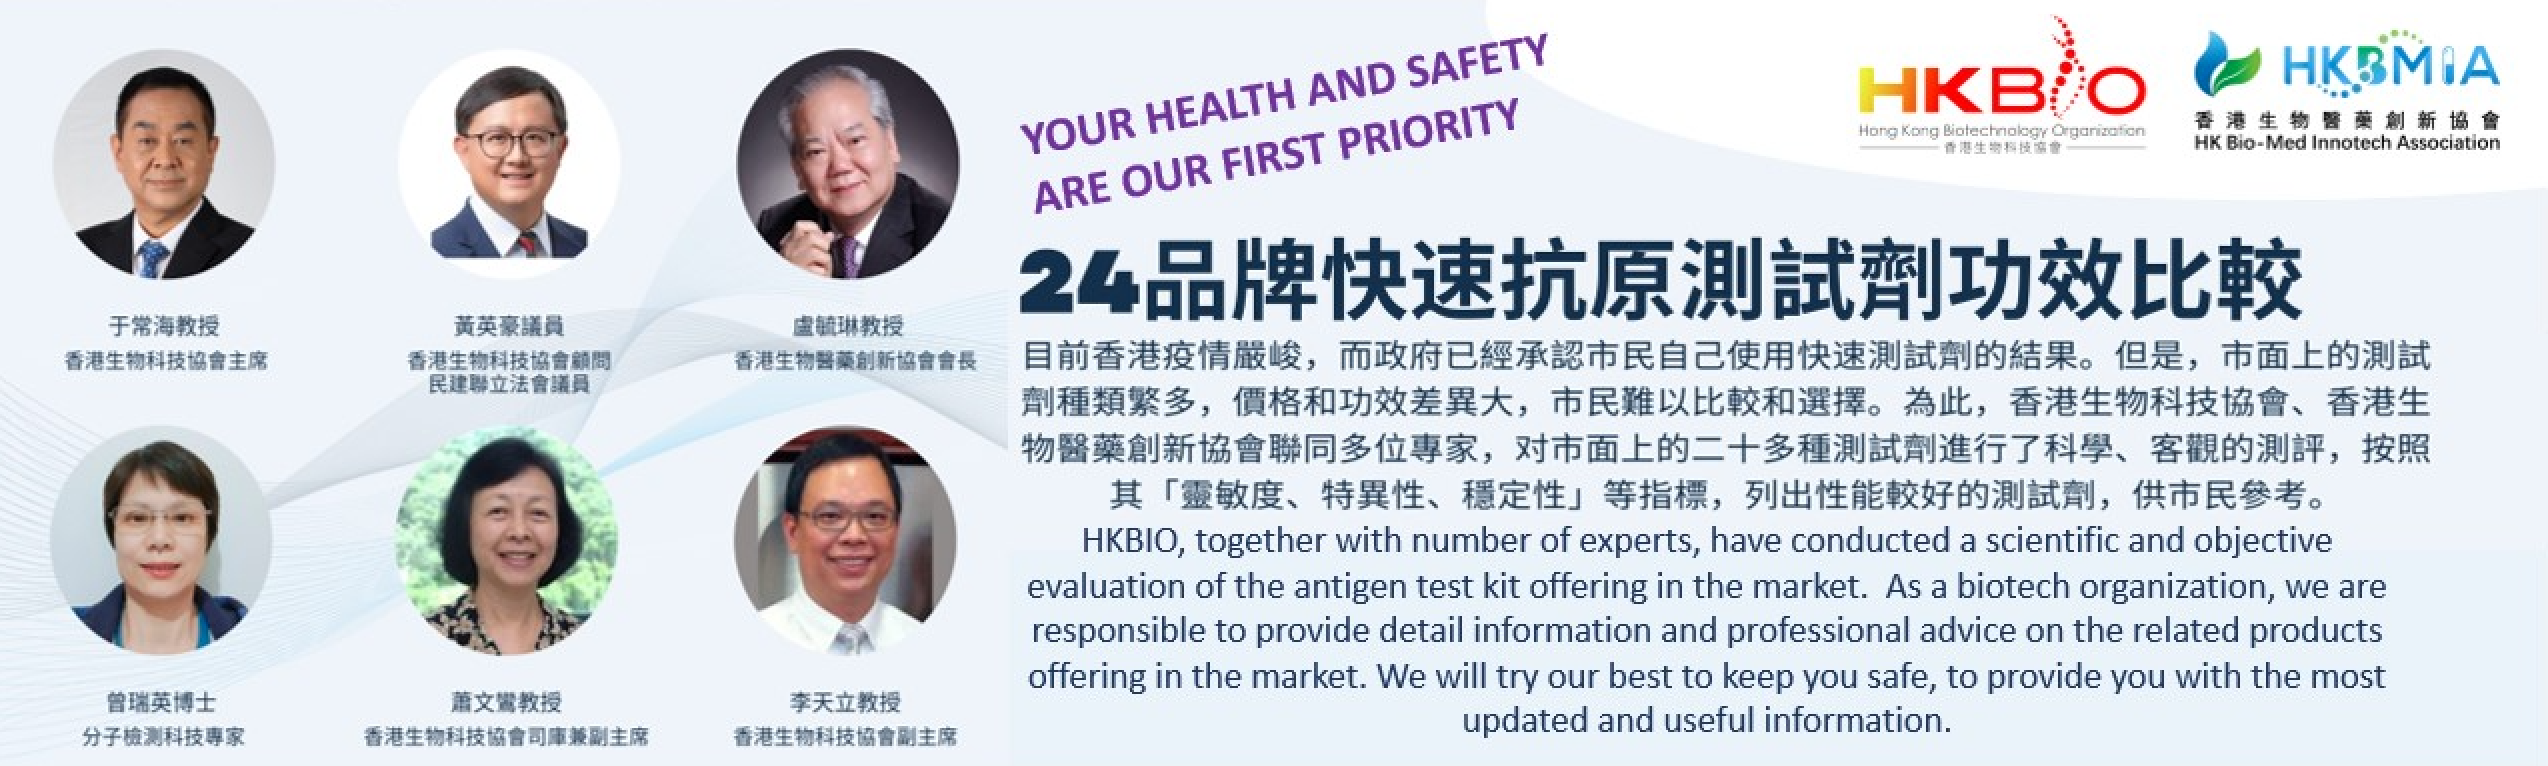 HKBIO, together with number of experts conducted a scientific and objective evaluation of anitgen test kit